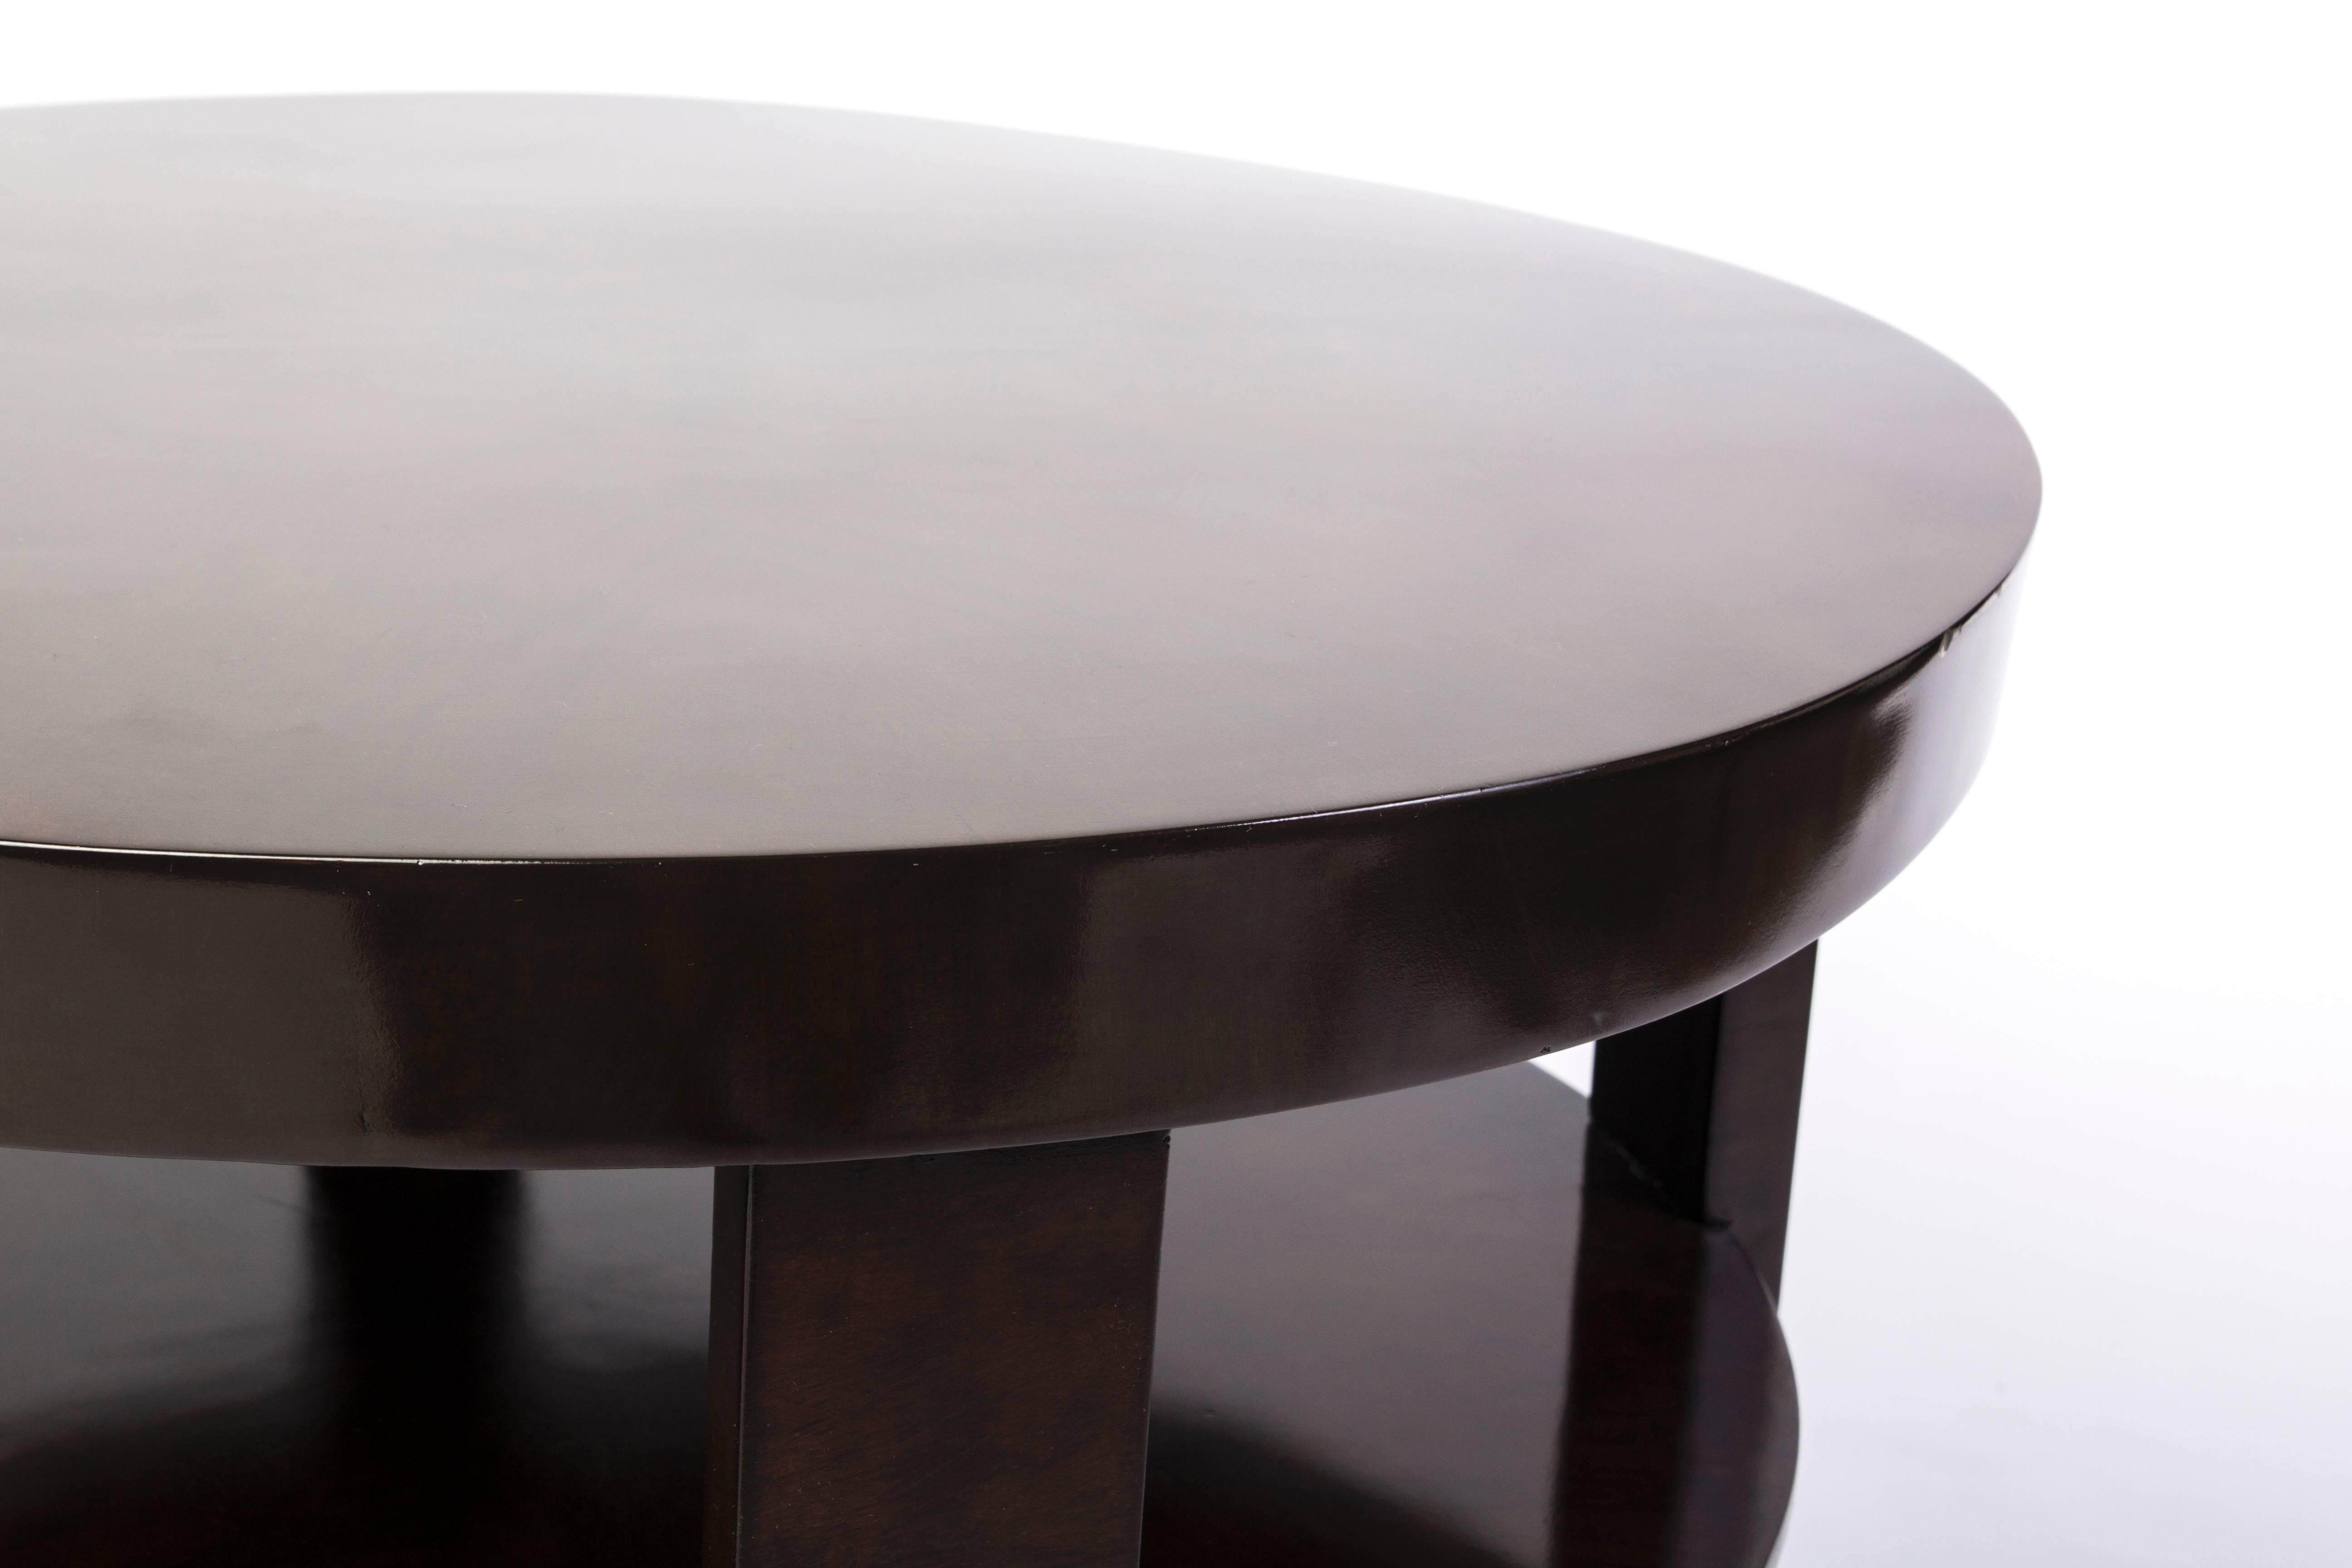 Elegant and simple Art Deco side table in solid mahogany and veneered in rosewood in a semi-gloss finish.